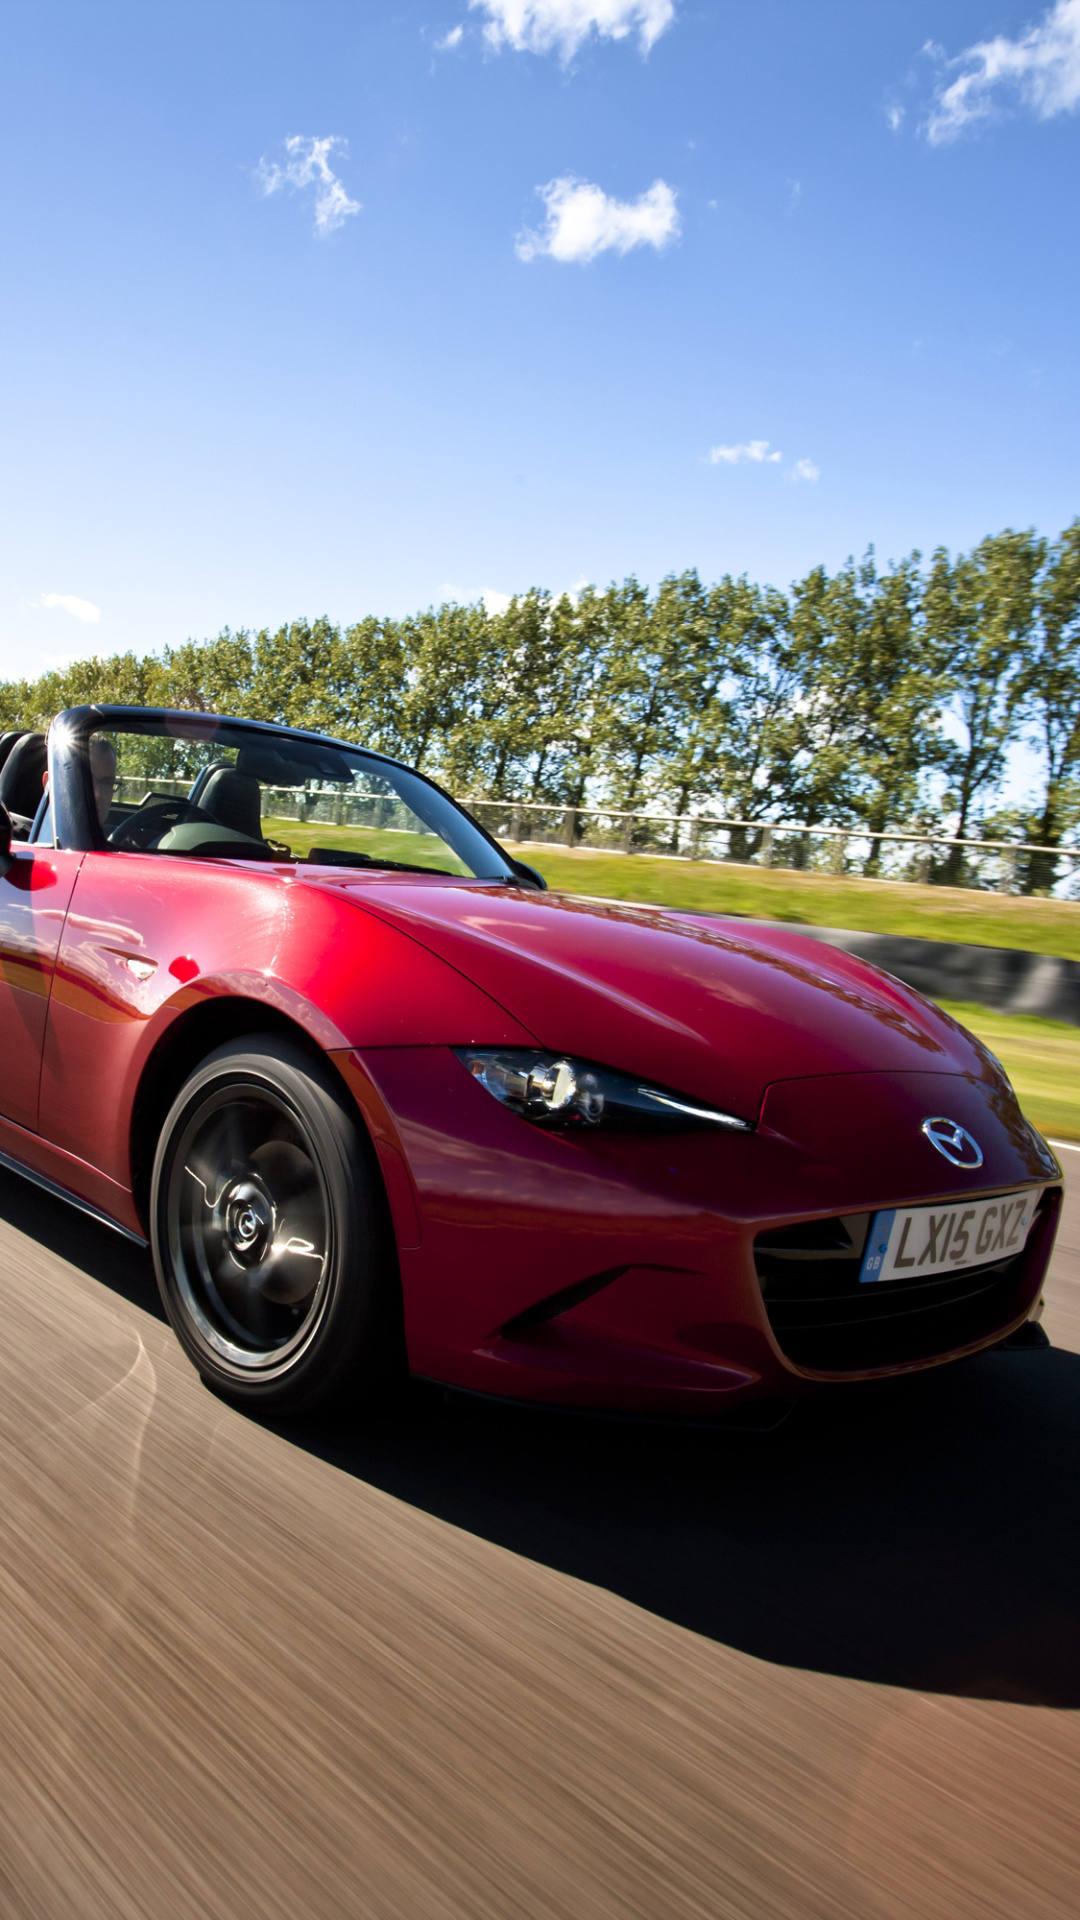 Mazda MX-5, Auto enthusiasts, Convertible freedom, Sports car experience, 1080x1920 Full HD Phone